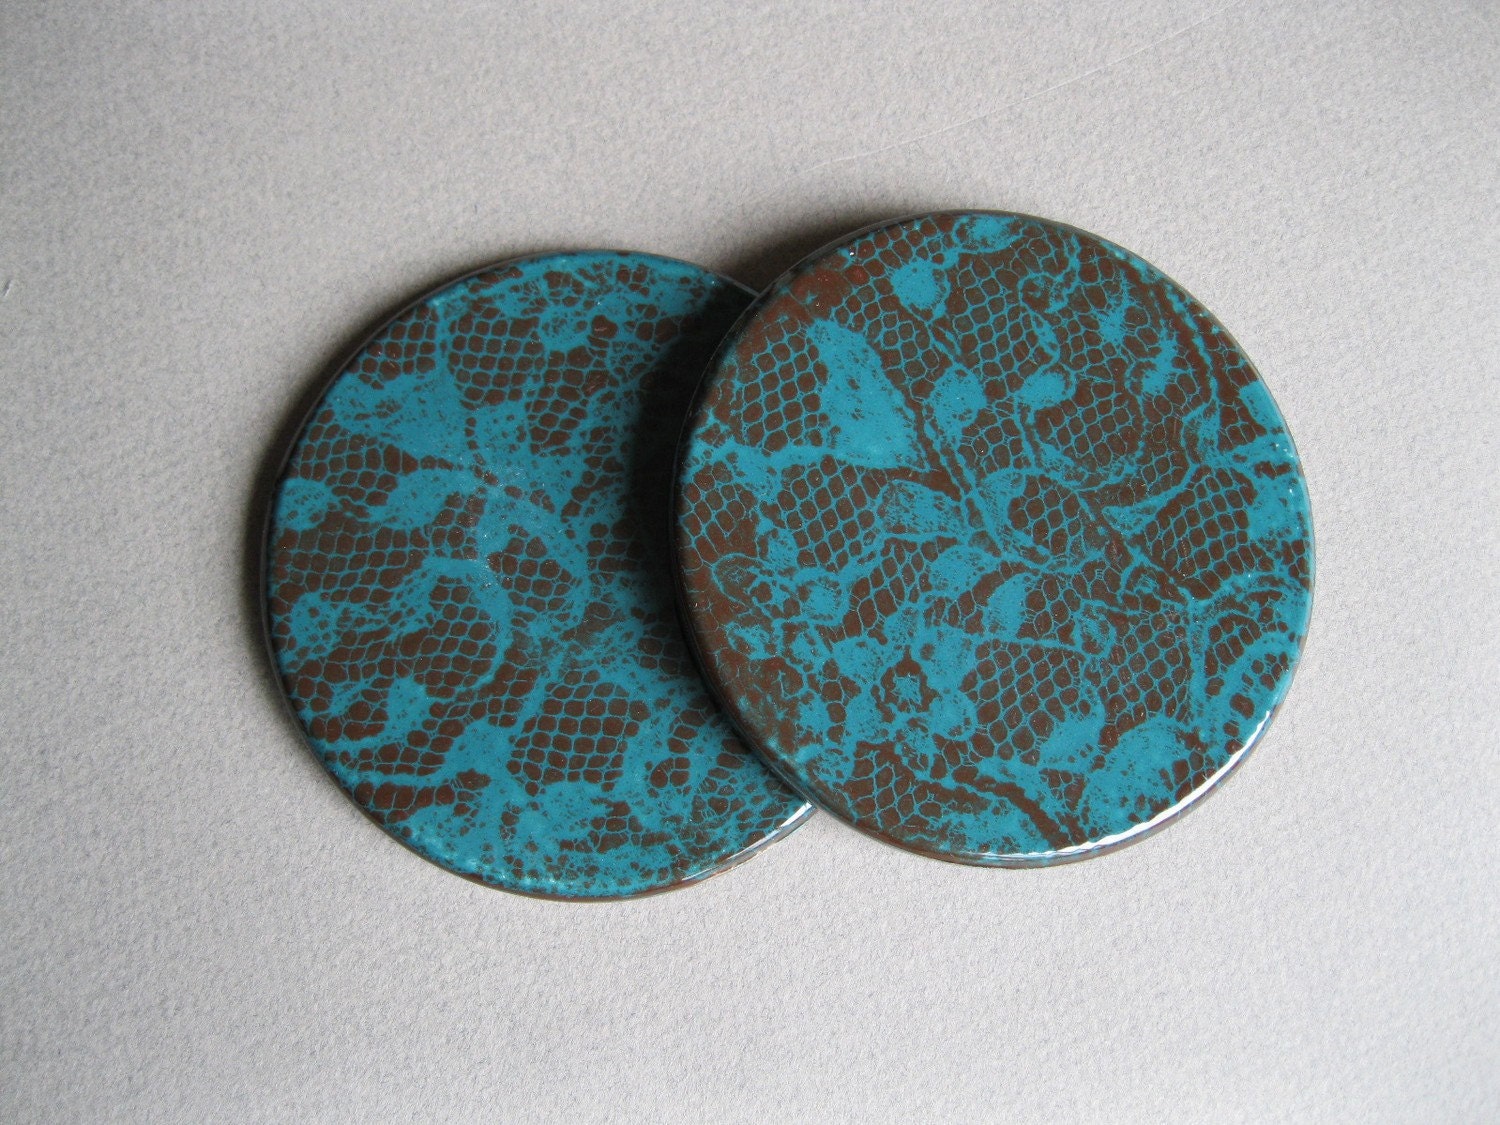 Set of 2 Round Teal and Brown Lace Coasters